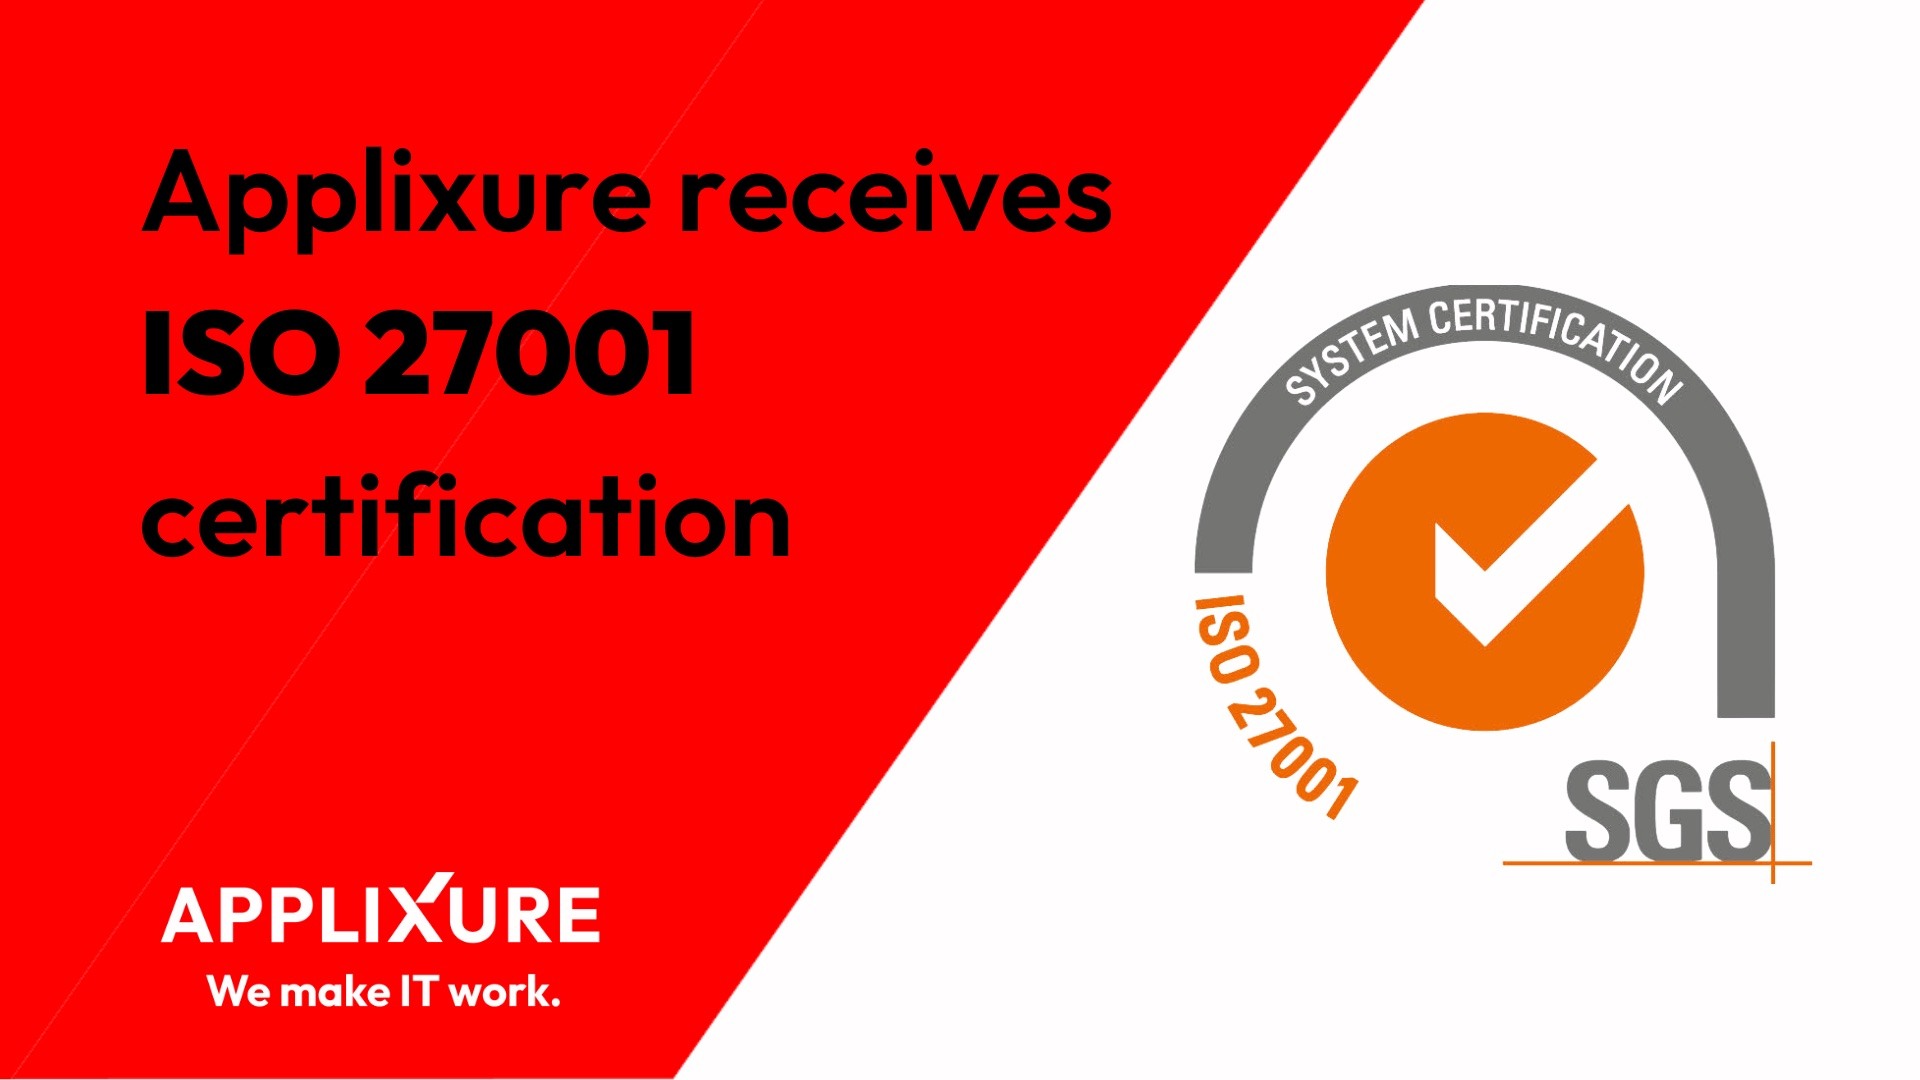 Applixure receives ISO 27001 certification